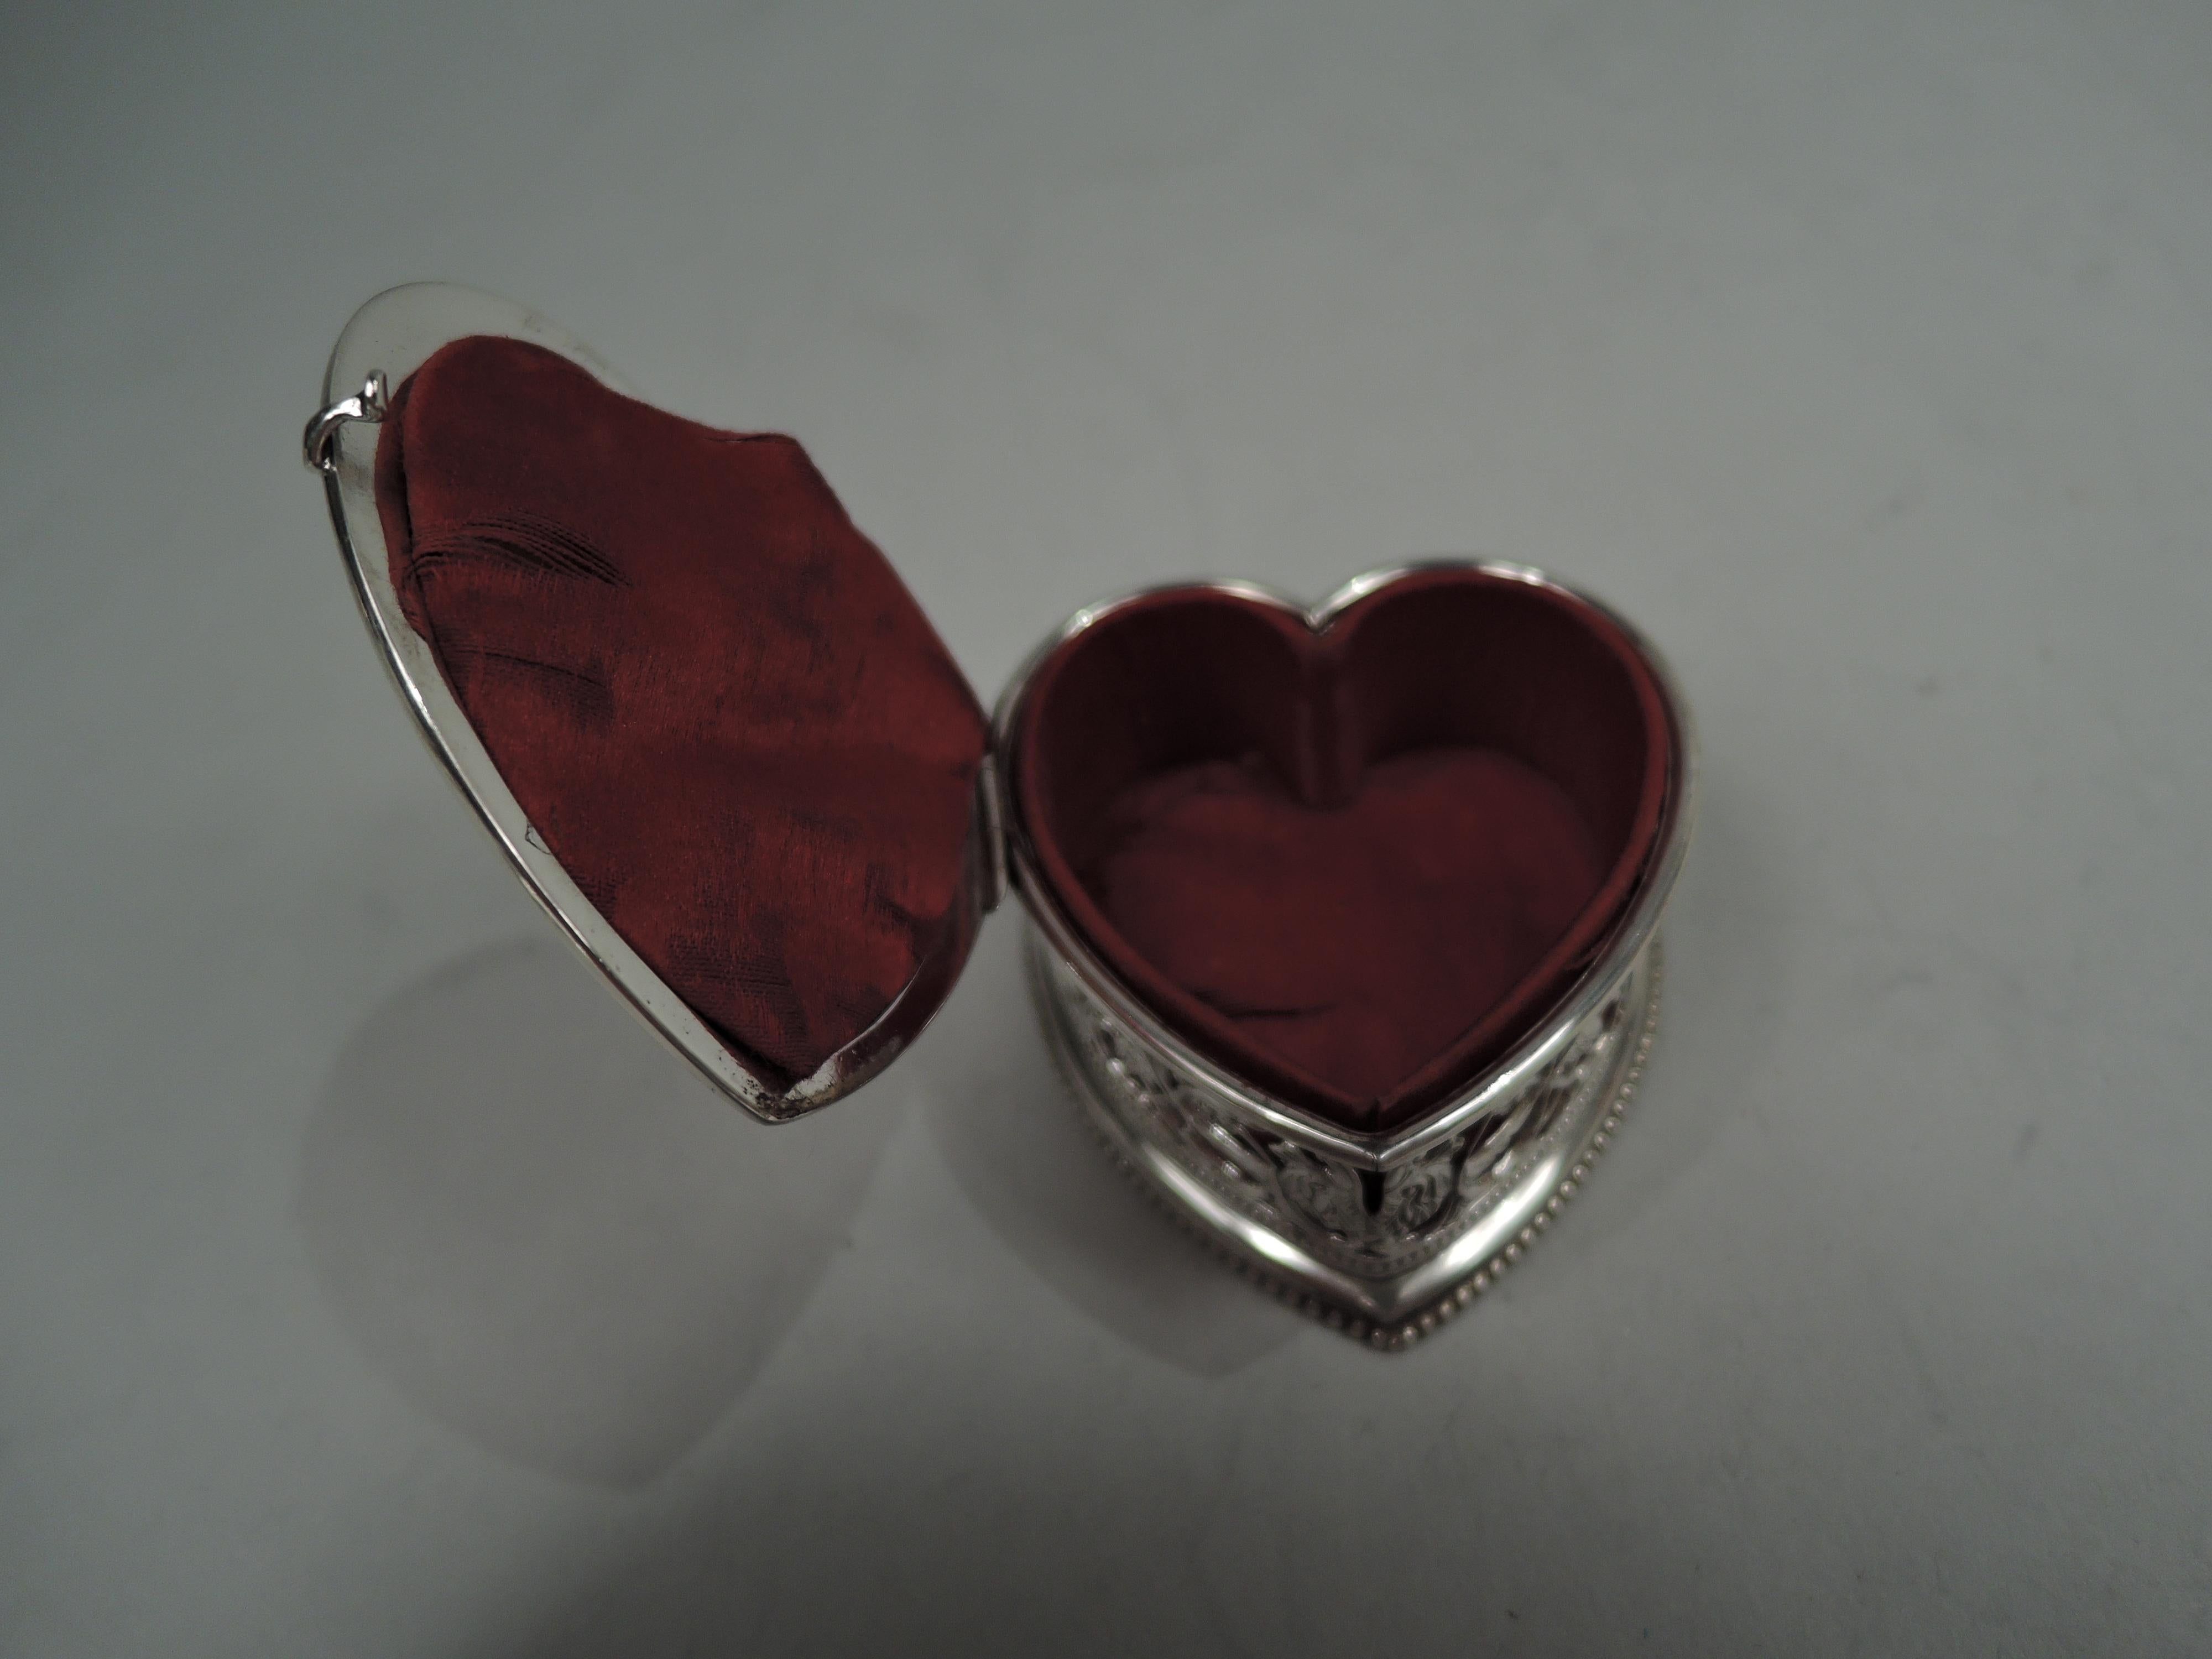 20th Century American Edwardian Classical Sterling Silver Heart-Shaped Jewelry Ring Box